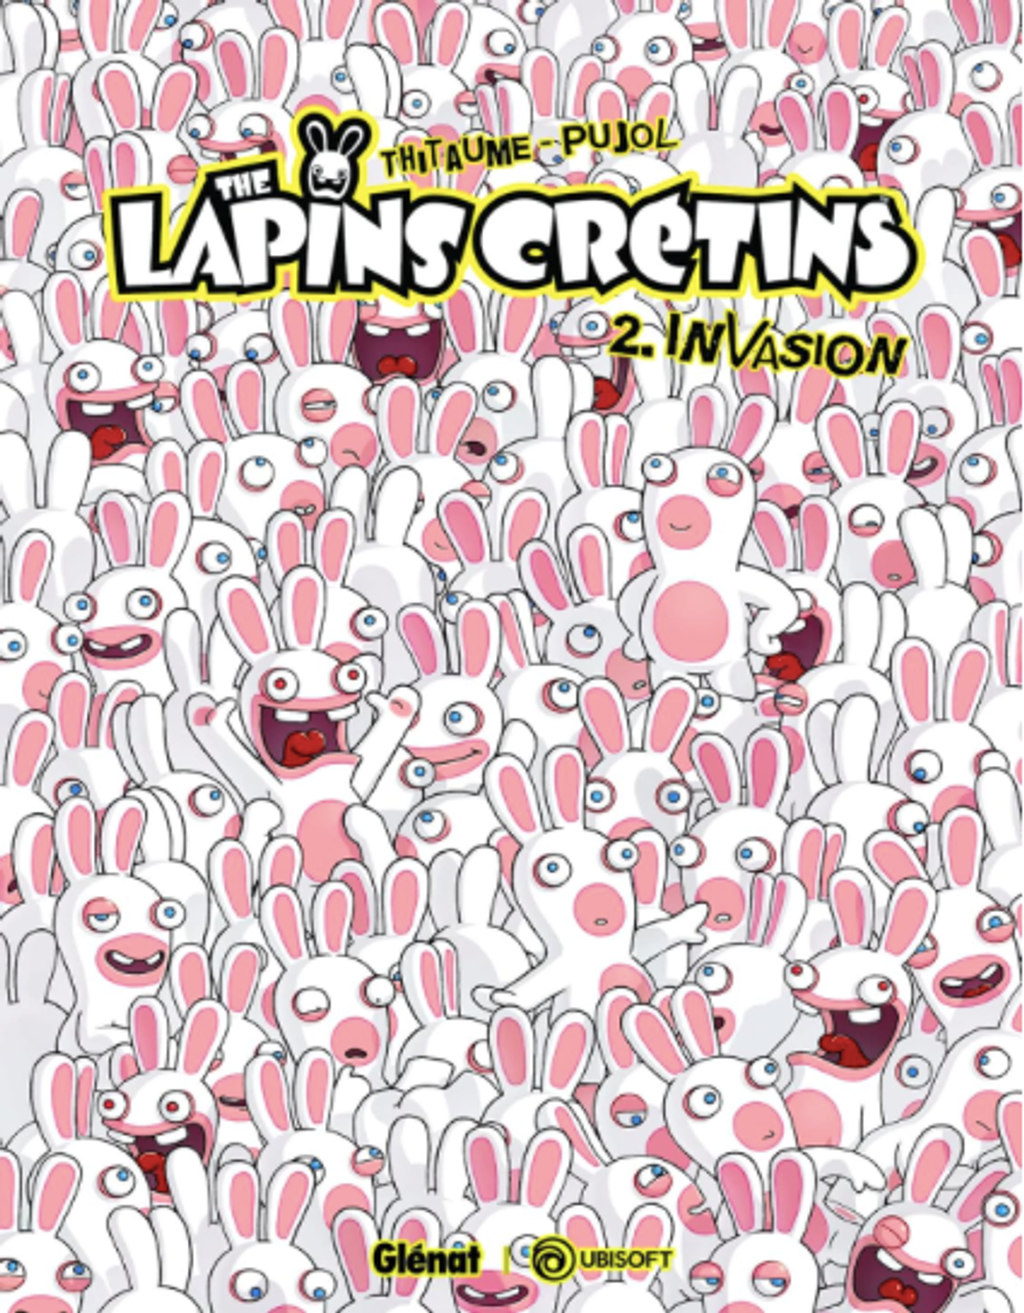 The lapins crétins Tome 2 Invasion Thitaume Pujol B 21